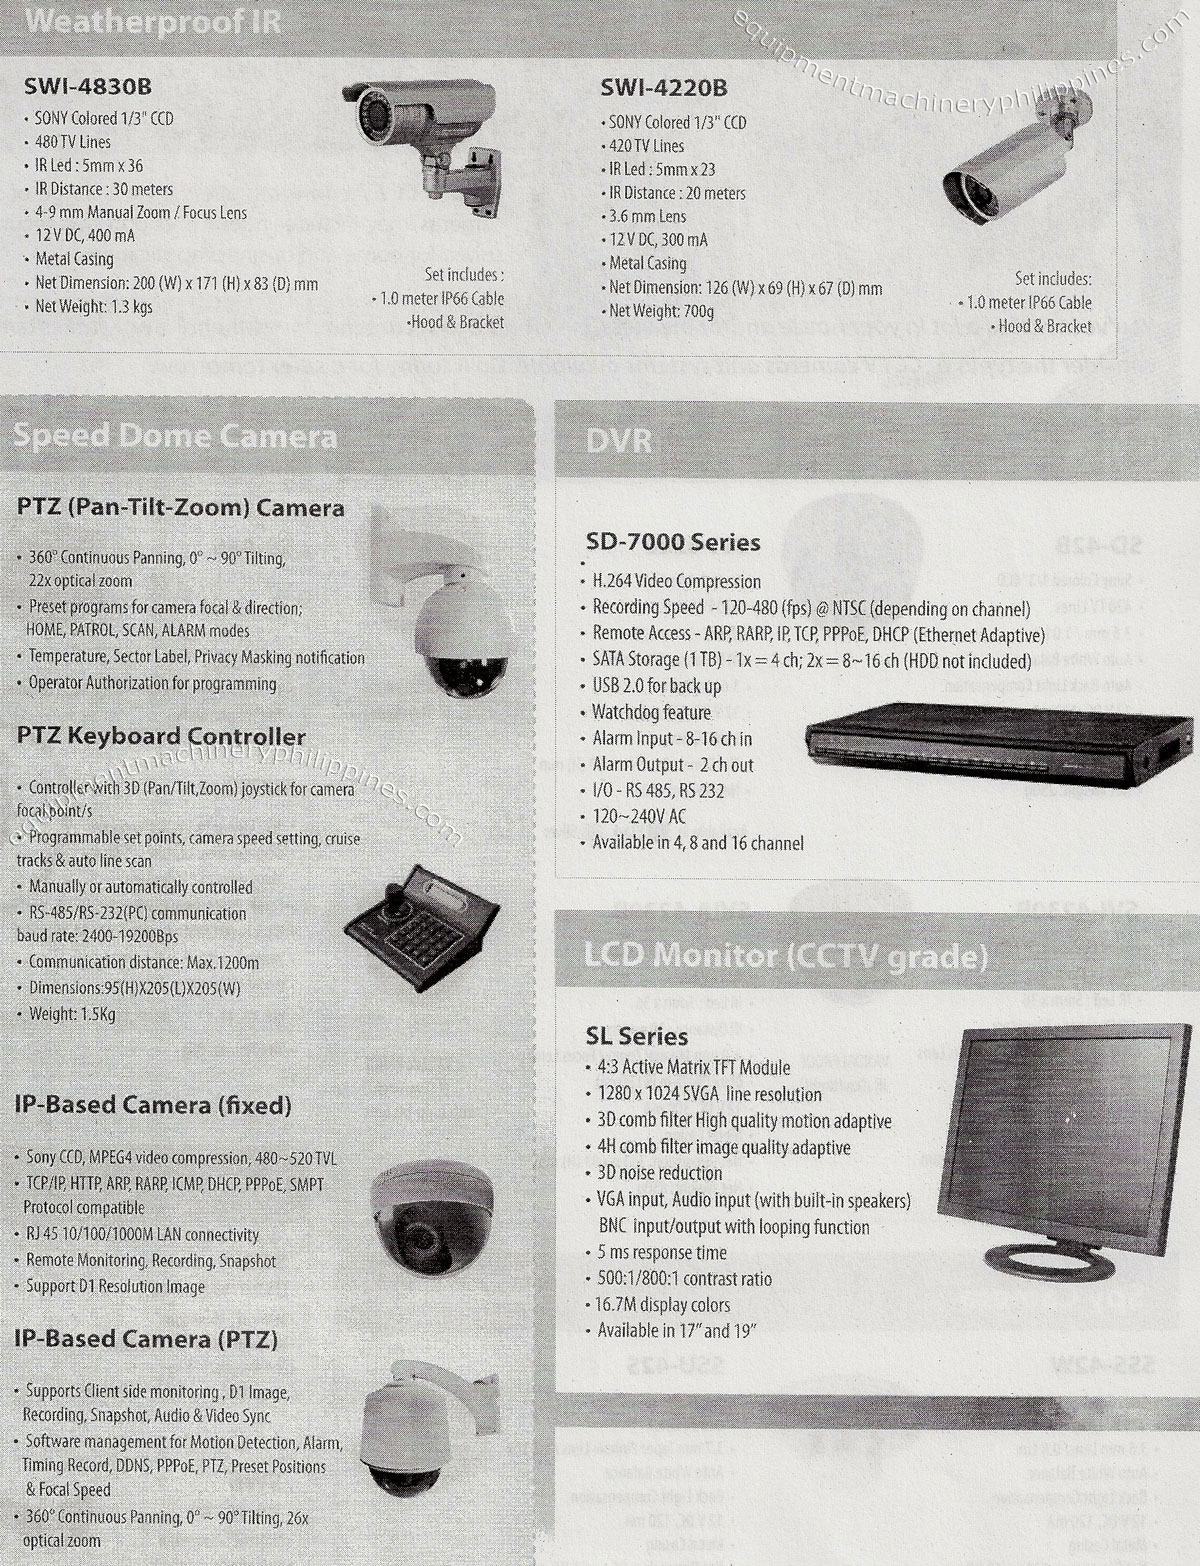 Secure CCTV Systems: Weatherproof IR, Speed Dome Camera, DVR, LCD Monitor